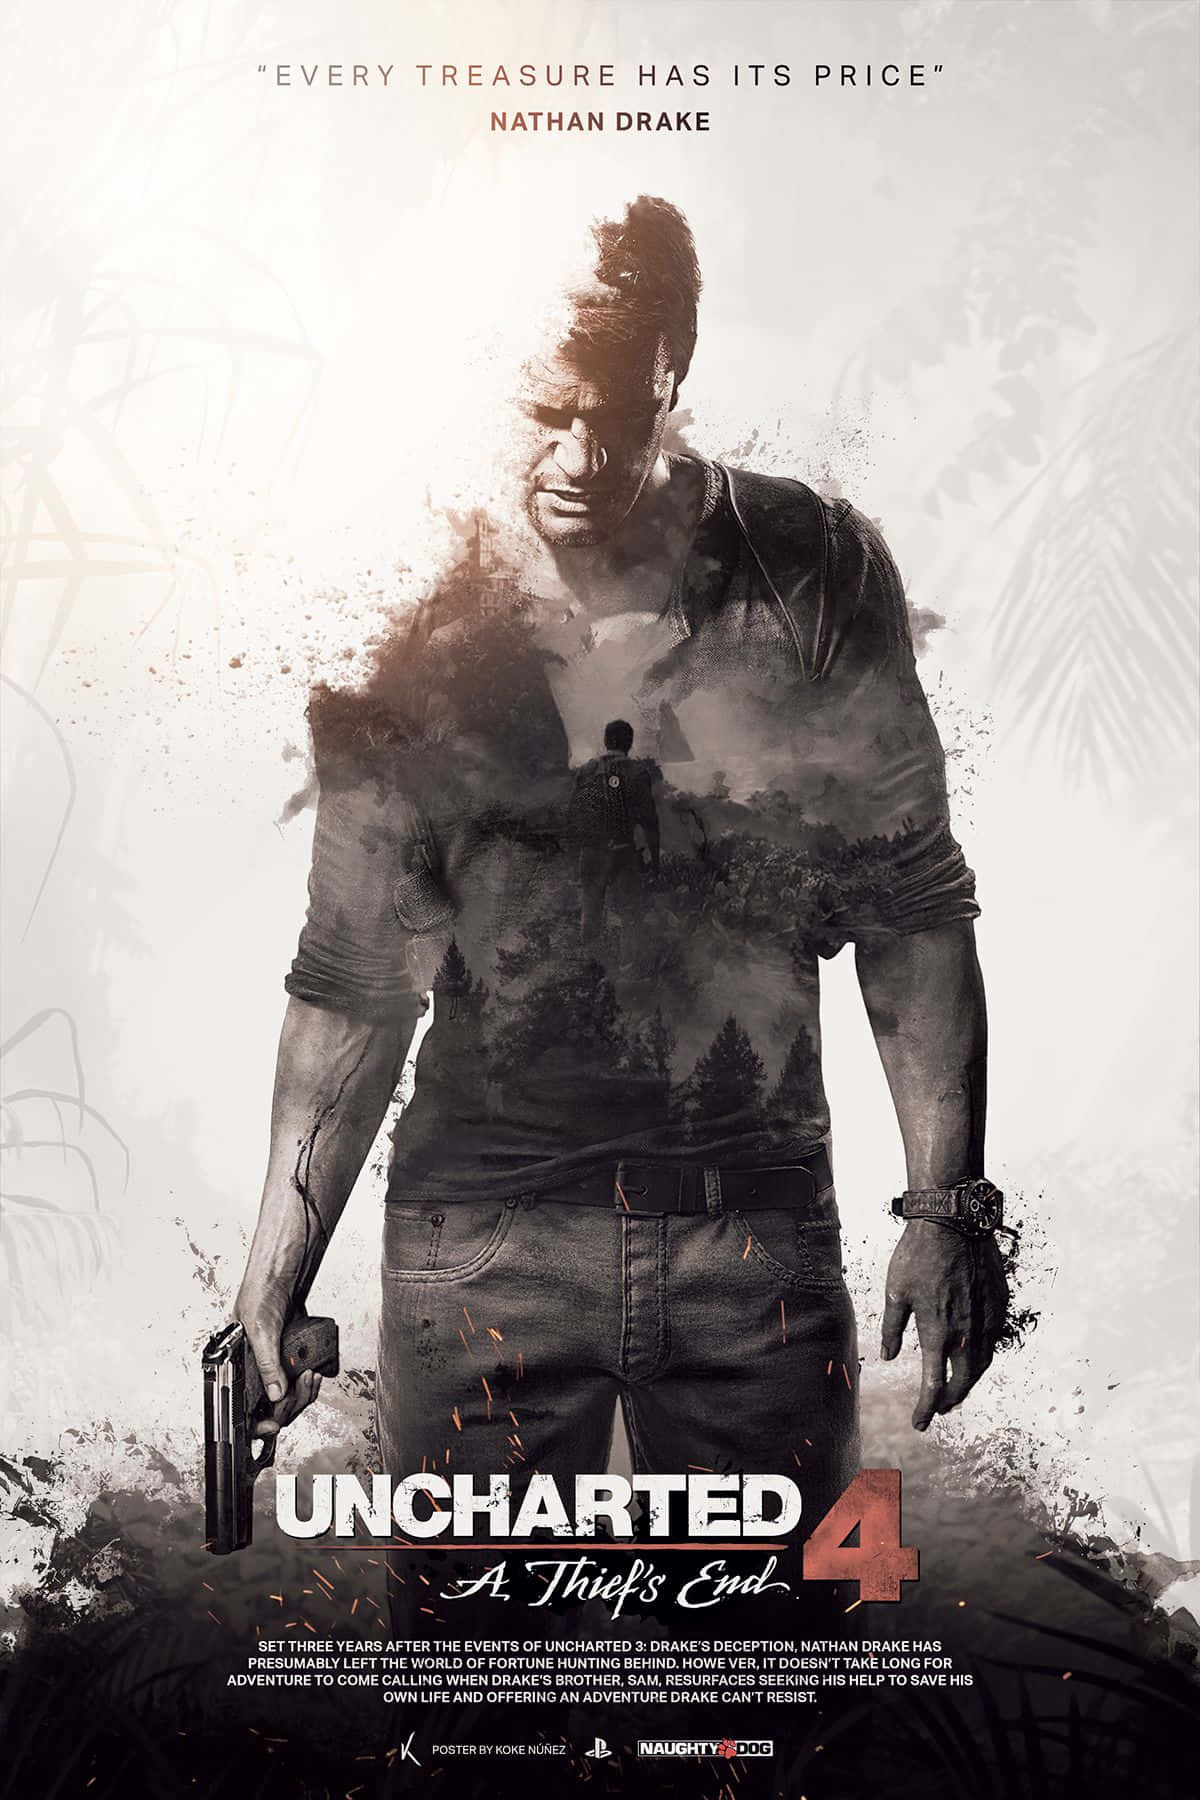 "Explore the Uncharted and Survive" Wallpaper